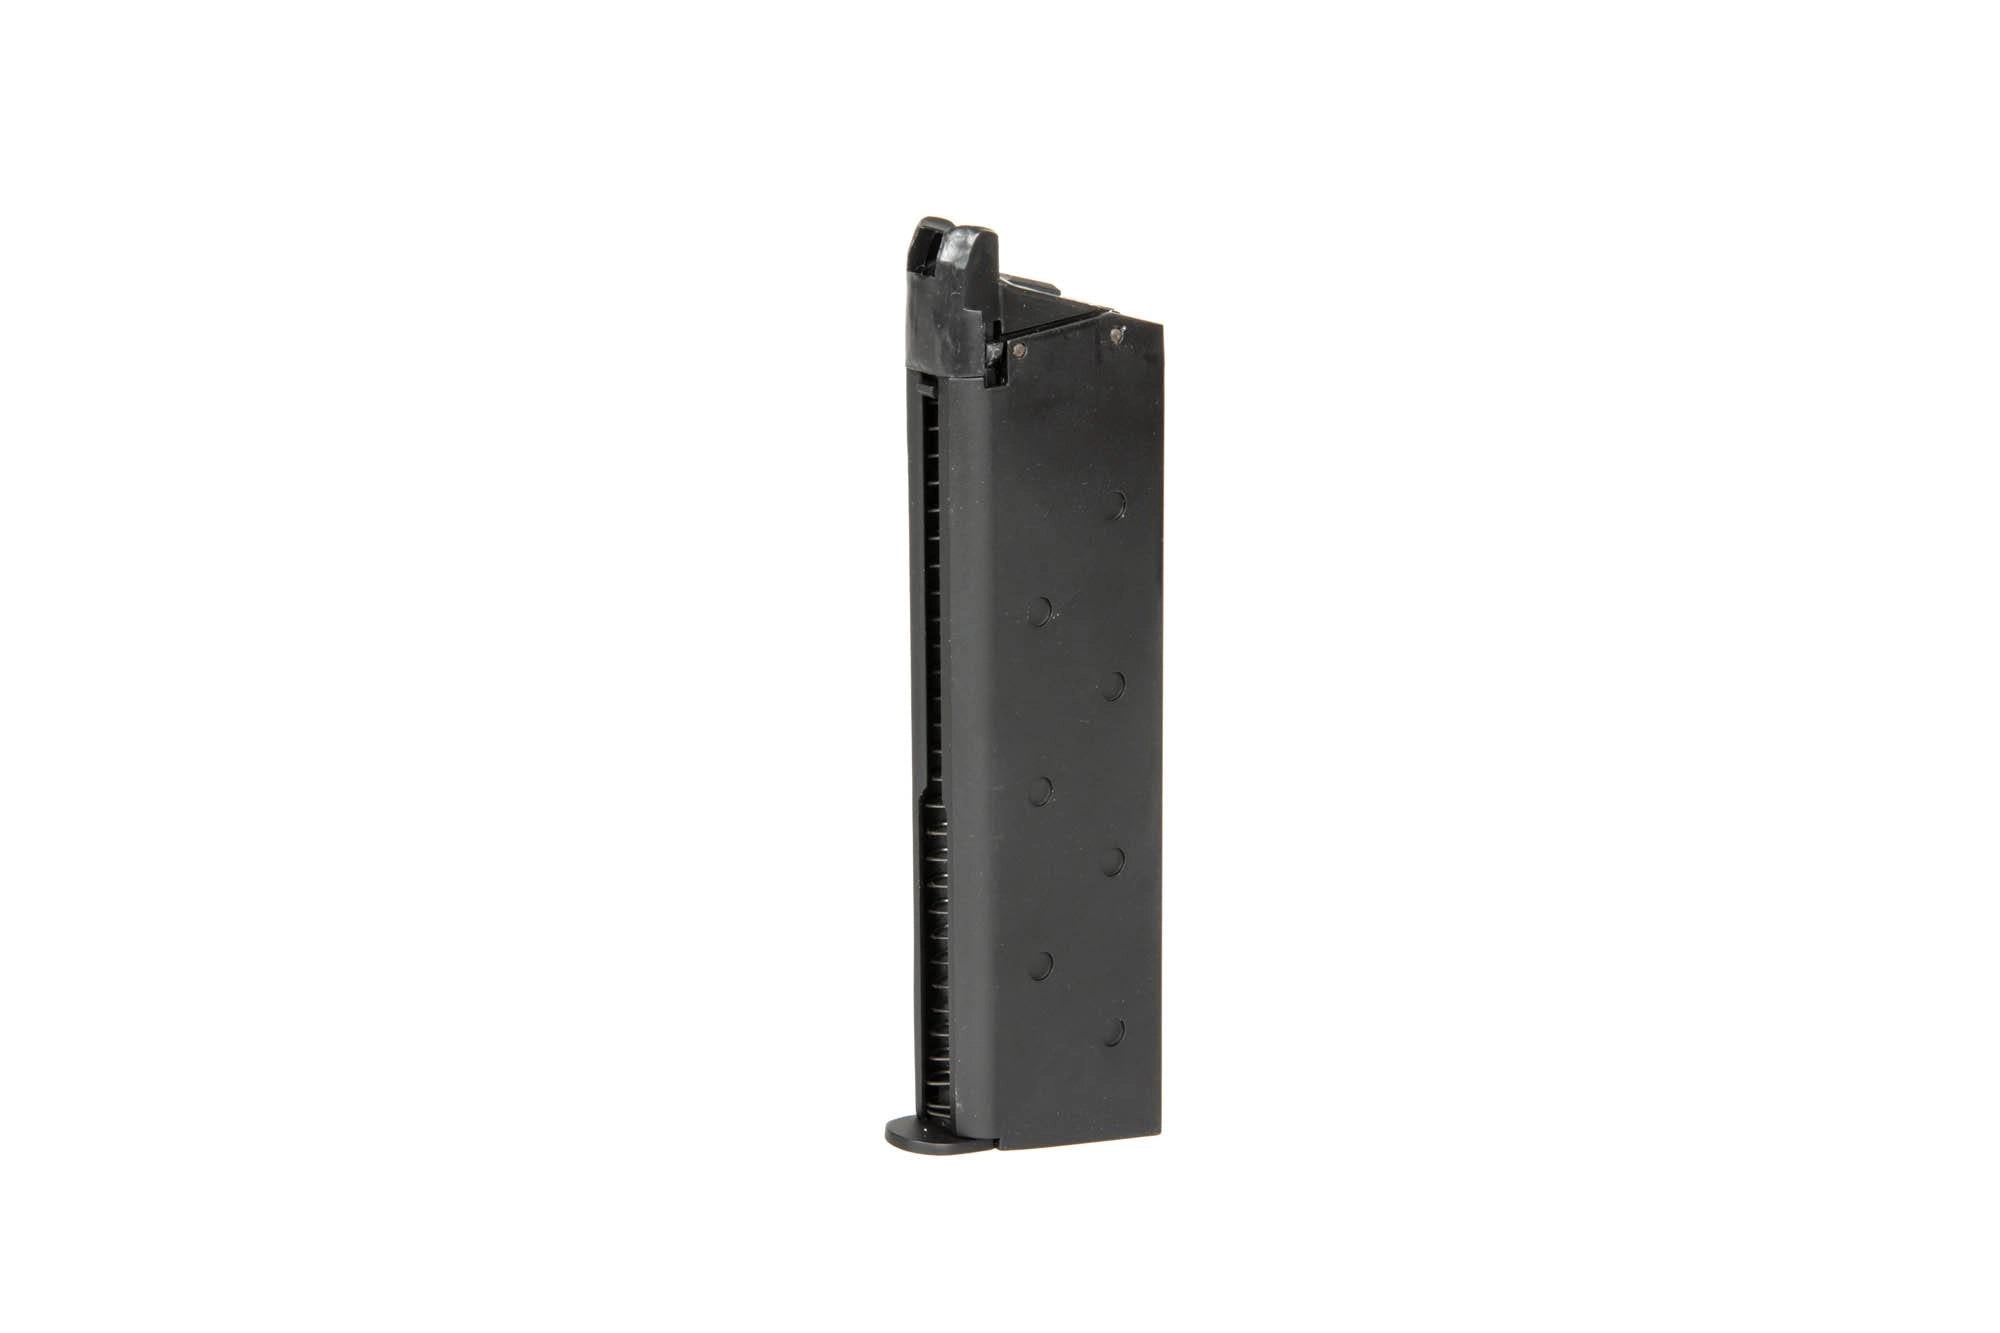 Green Gas 25 BB Magazine for Double Bell 723 (M1911) Replicas